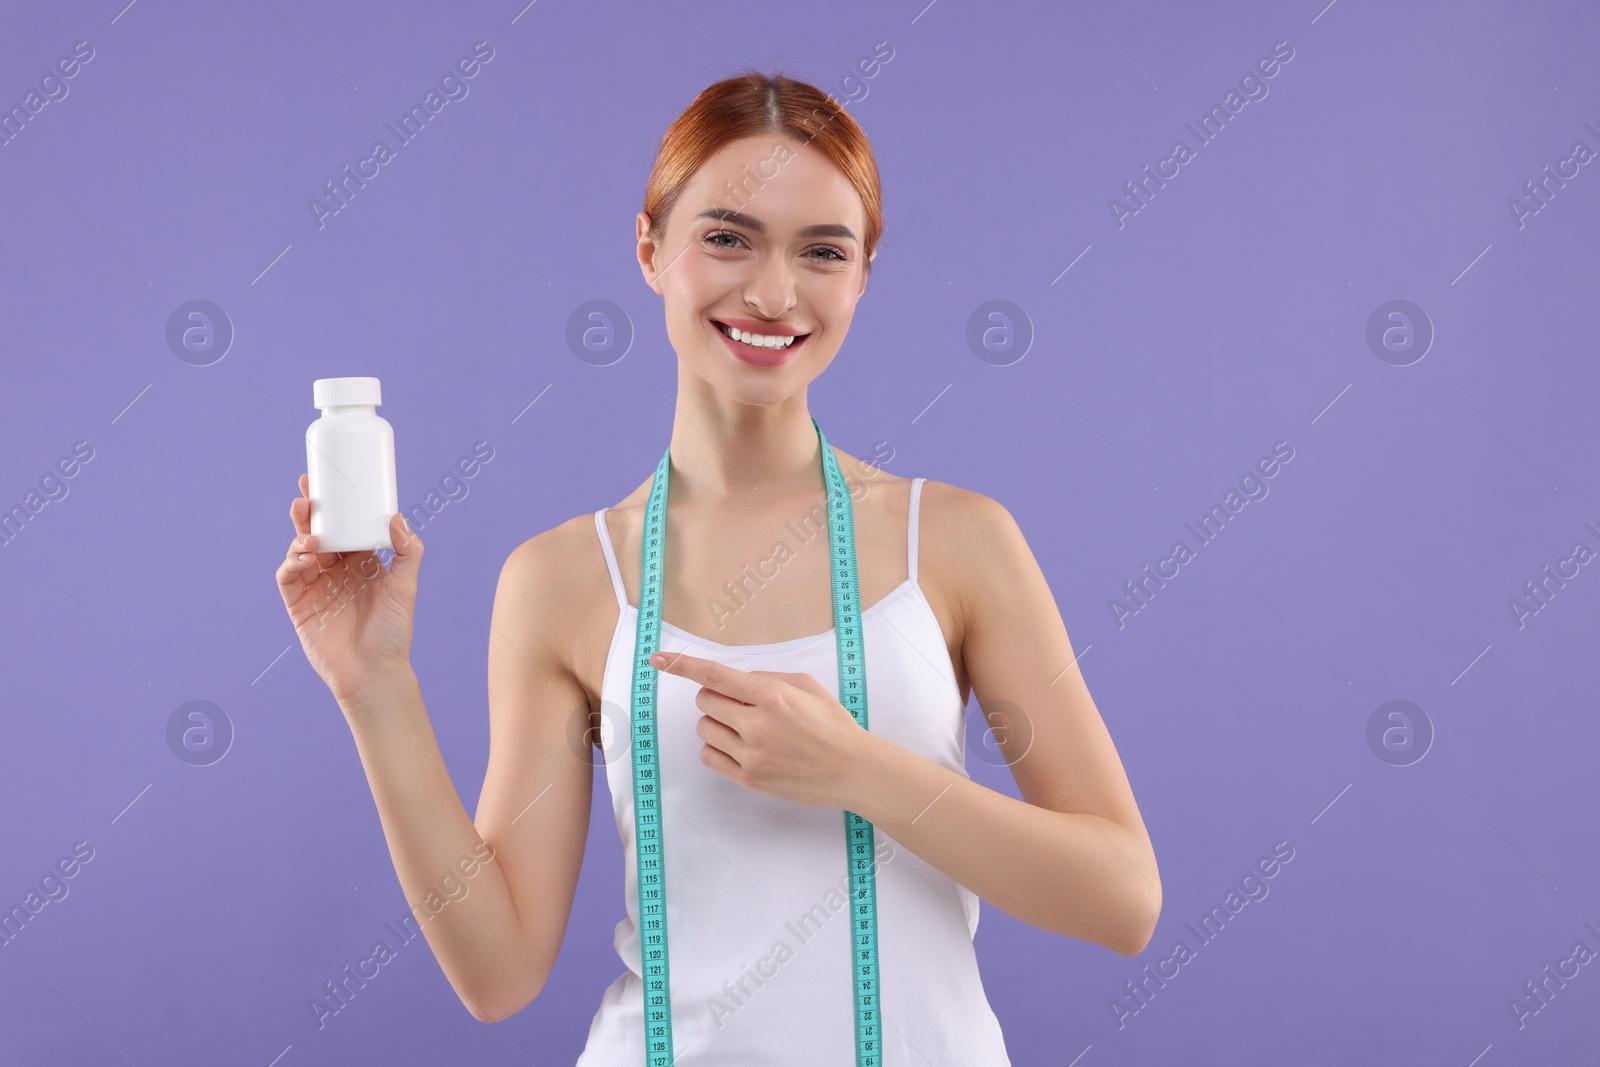 Photo of Happy young woman with bottle of pills and measuring tape on purple background. Weight loss